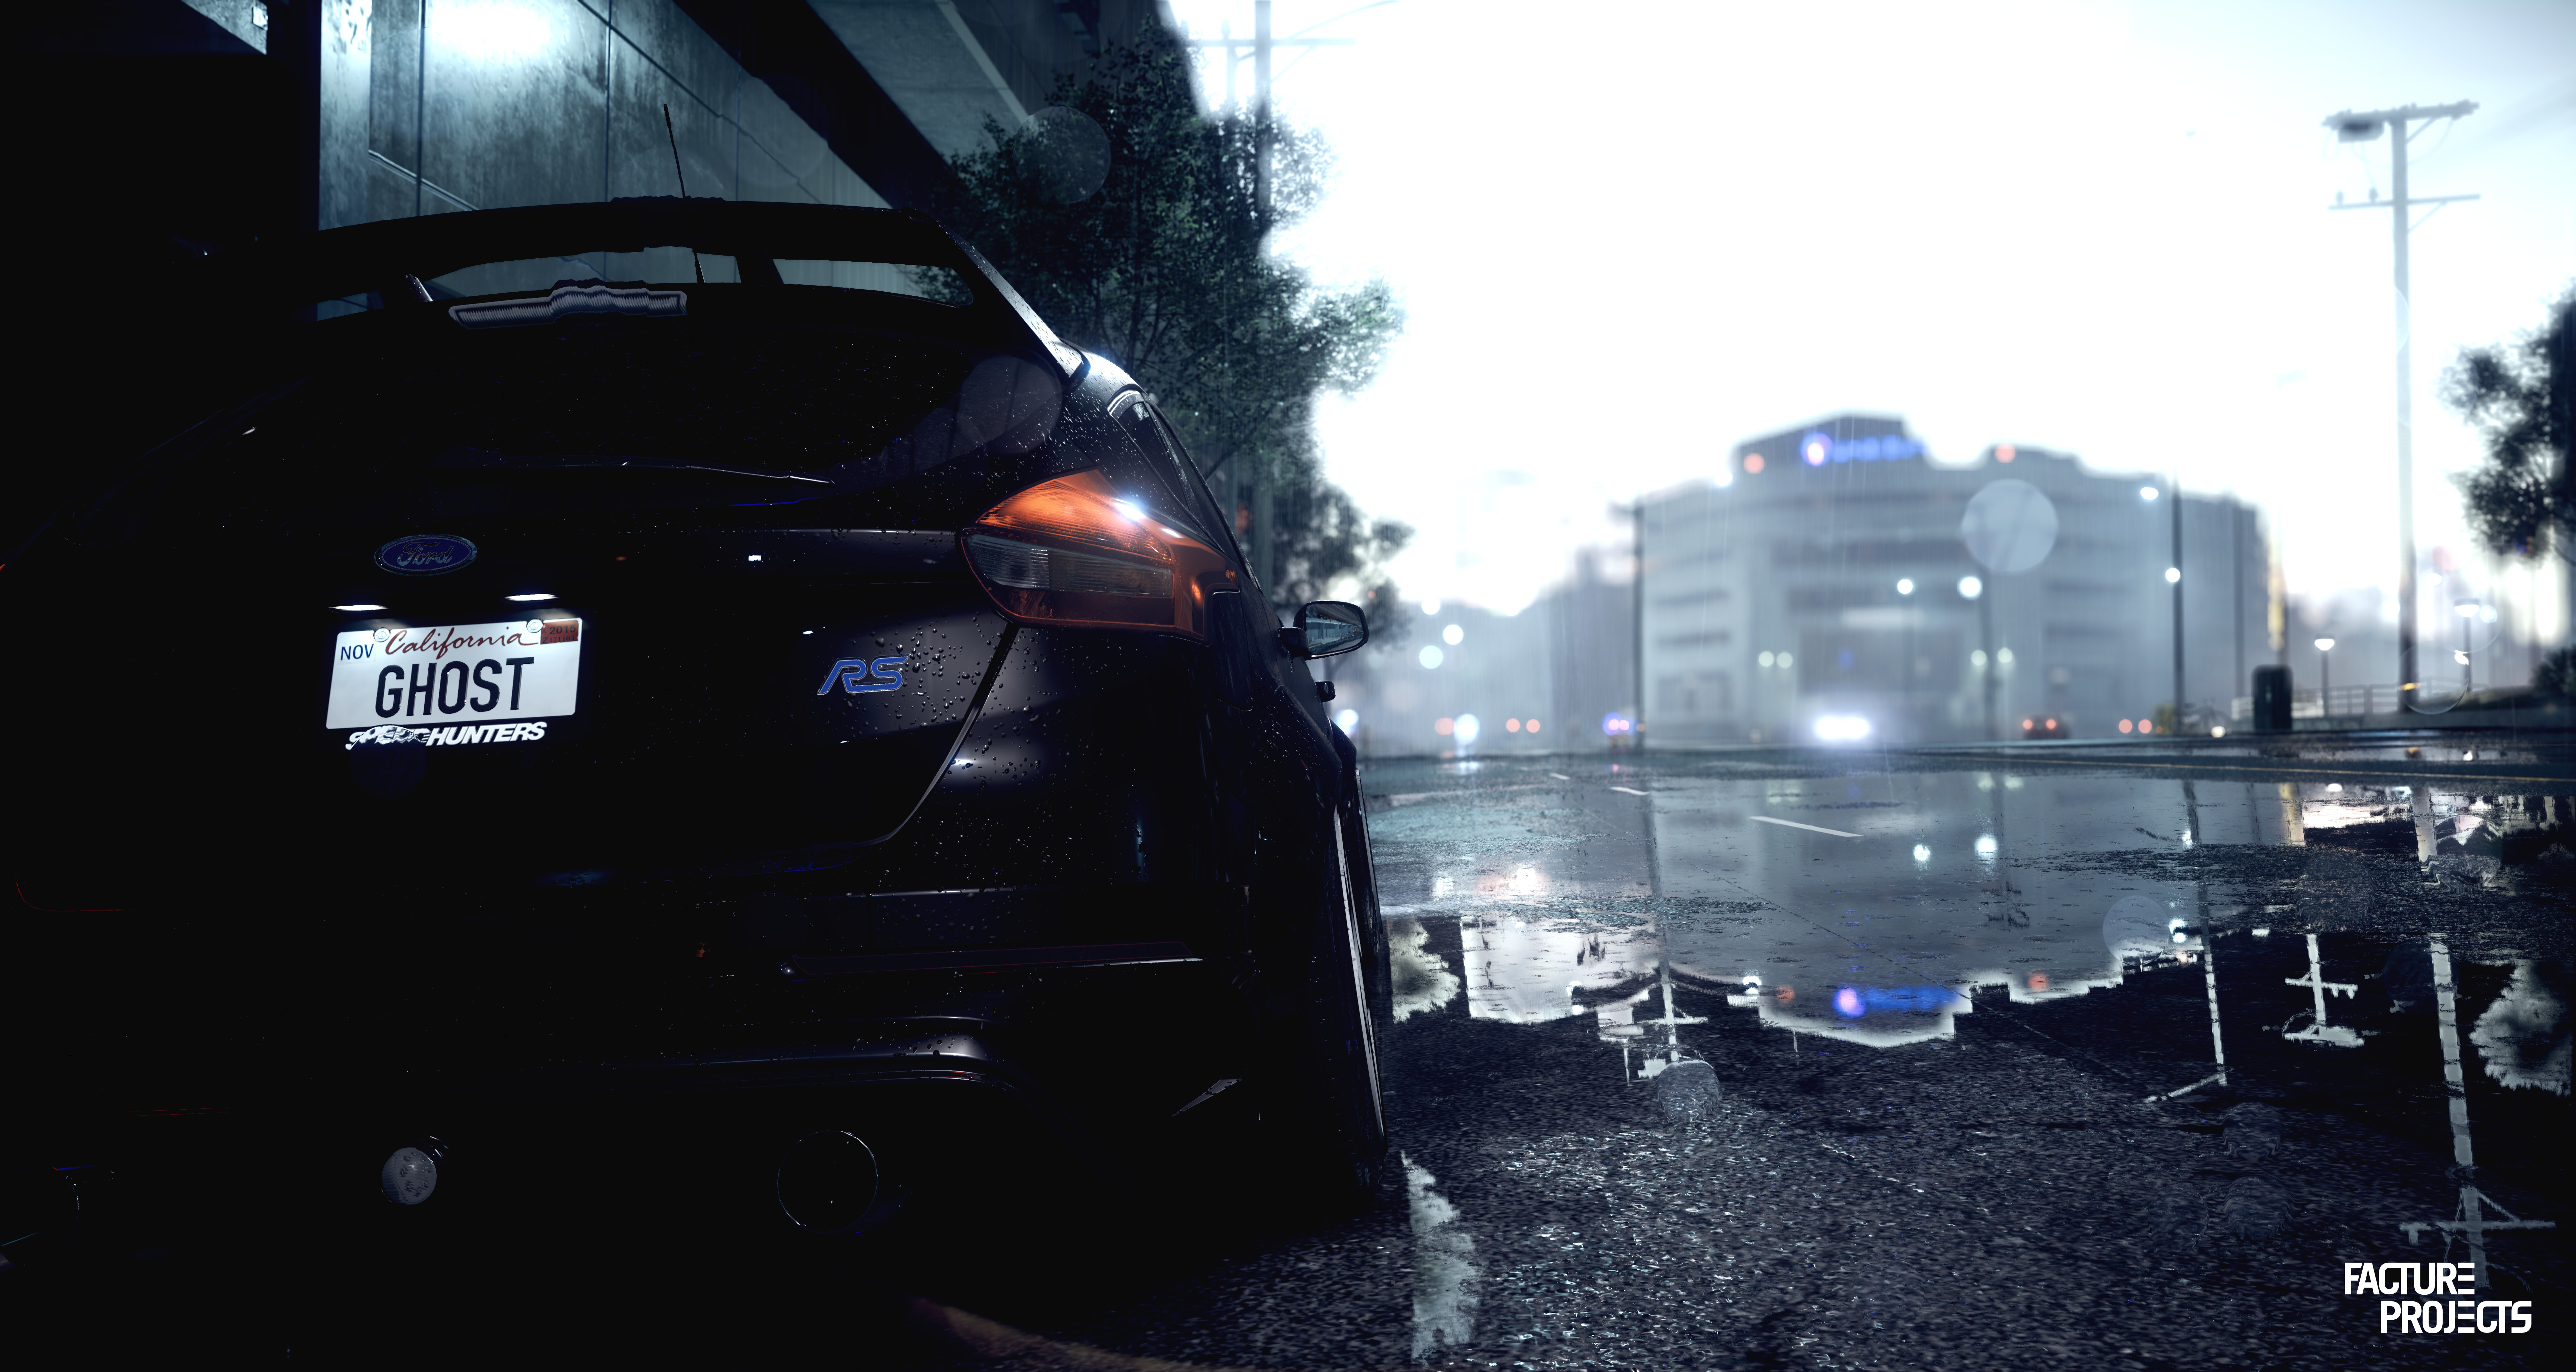 Ford Ford Focus RS Black NFS 2015 Need For Speed Wallpaper -  Resolution:7632x4064 - ID:1190382 